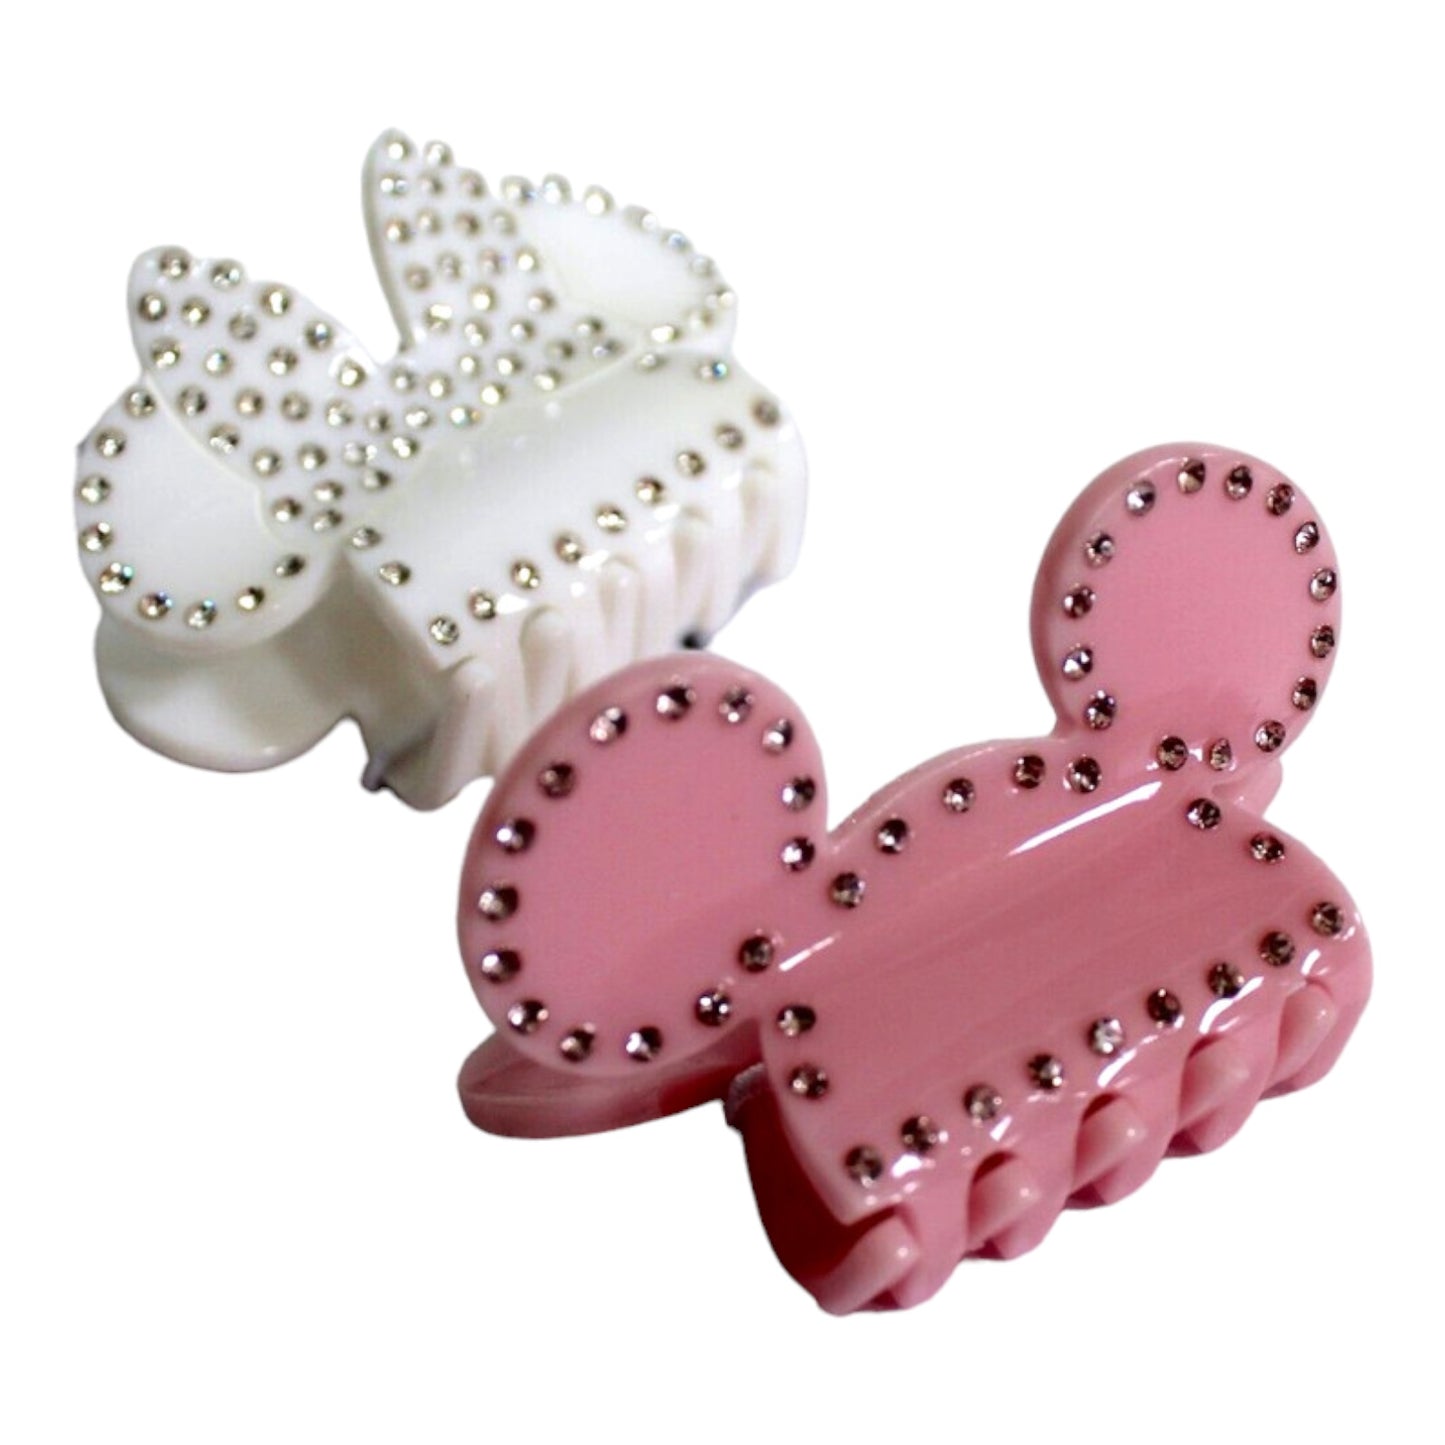 Disney x Baublebar Mickey and Minnie Mouse Hair Jaw Clips Rhinestones in Pink and White